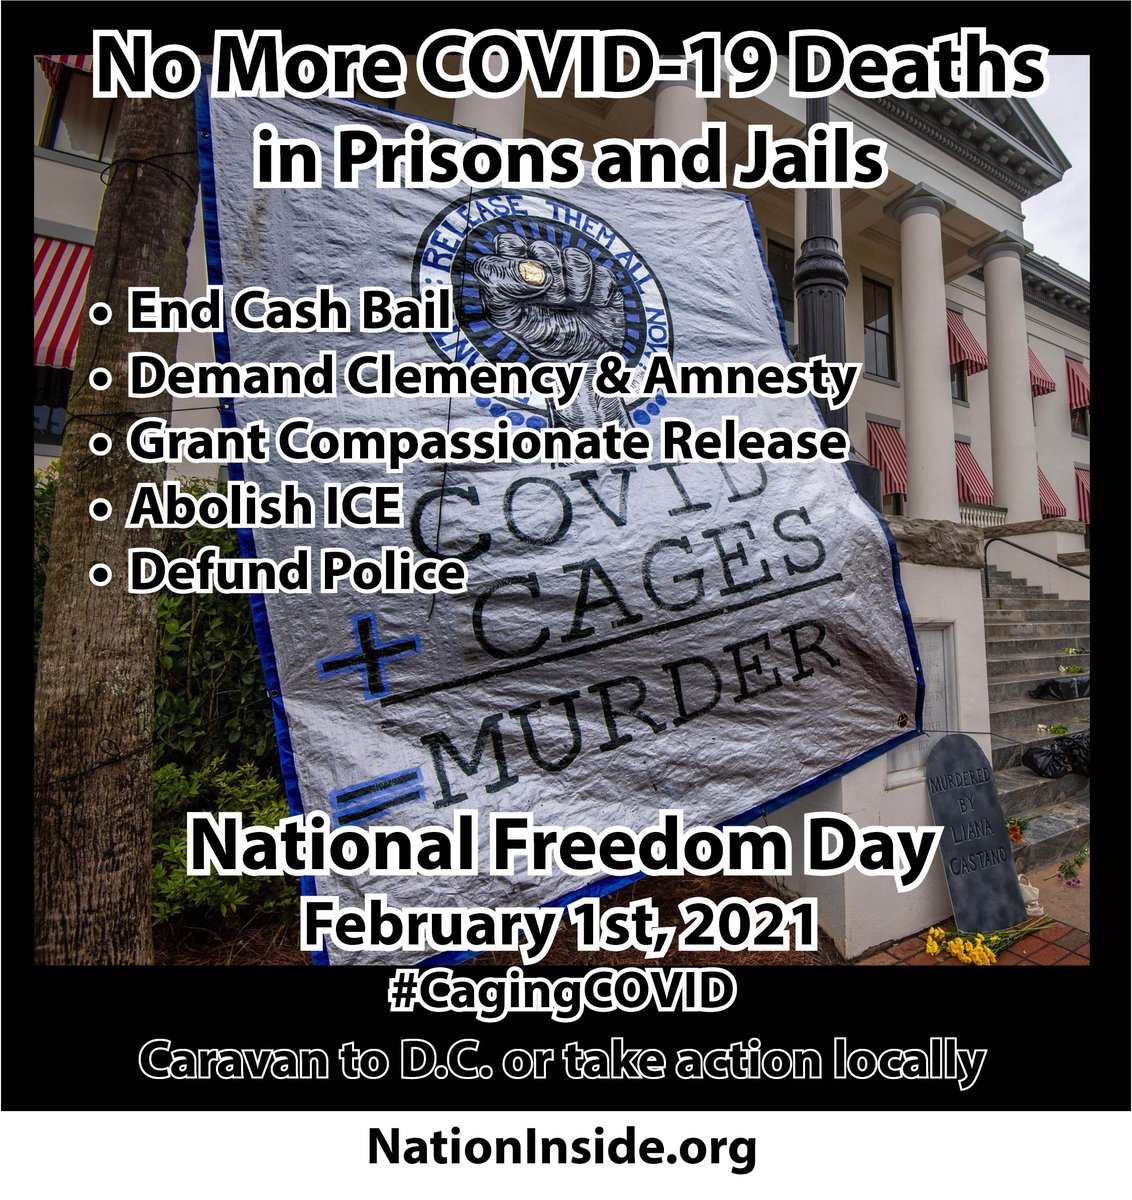 COVID-19 in prisons is an environmental justice issue. This Feb 1st fight to protect the health of the human ecosystem, including those behind bars. #NationalFreedomDay #CagingCOVID nationinside.org/campaign/cagin…